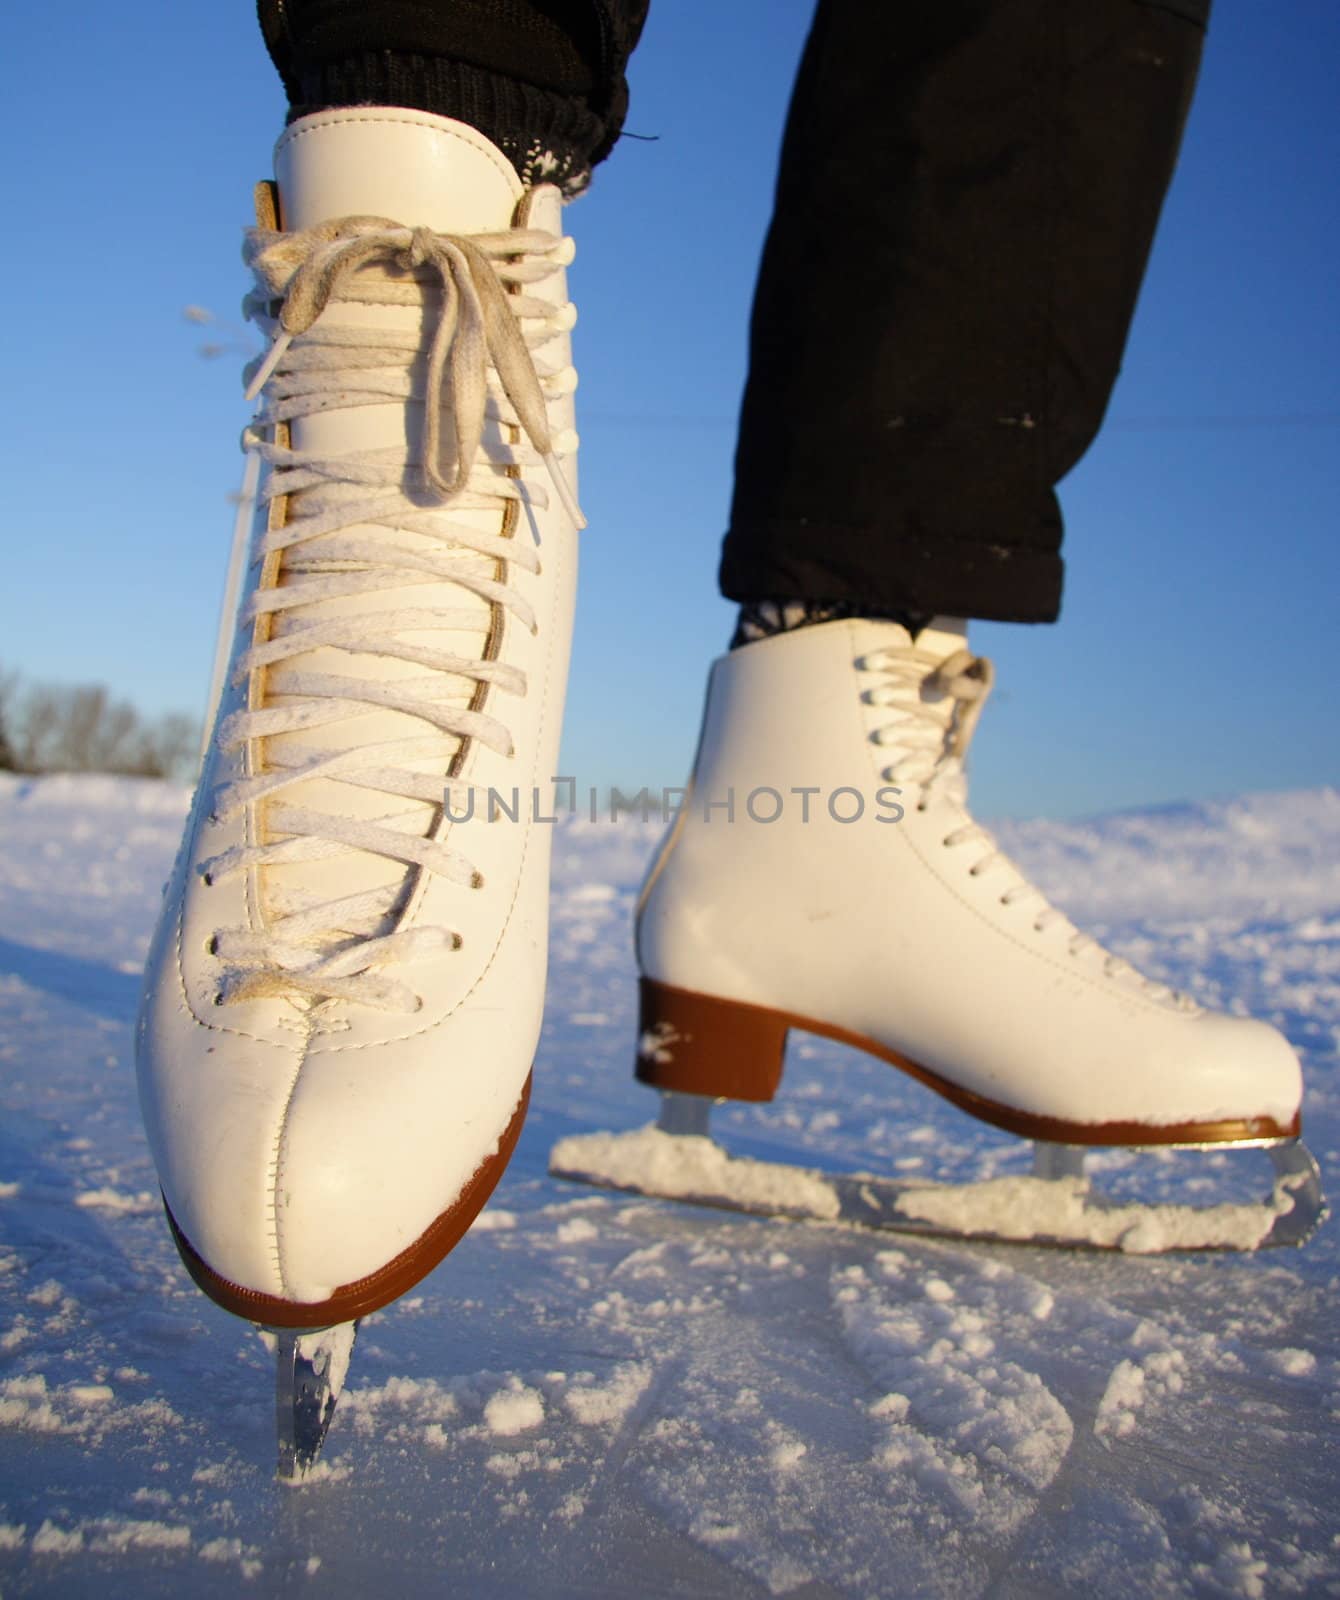 Closeup of figure skating ice skates in action outdoors